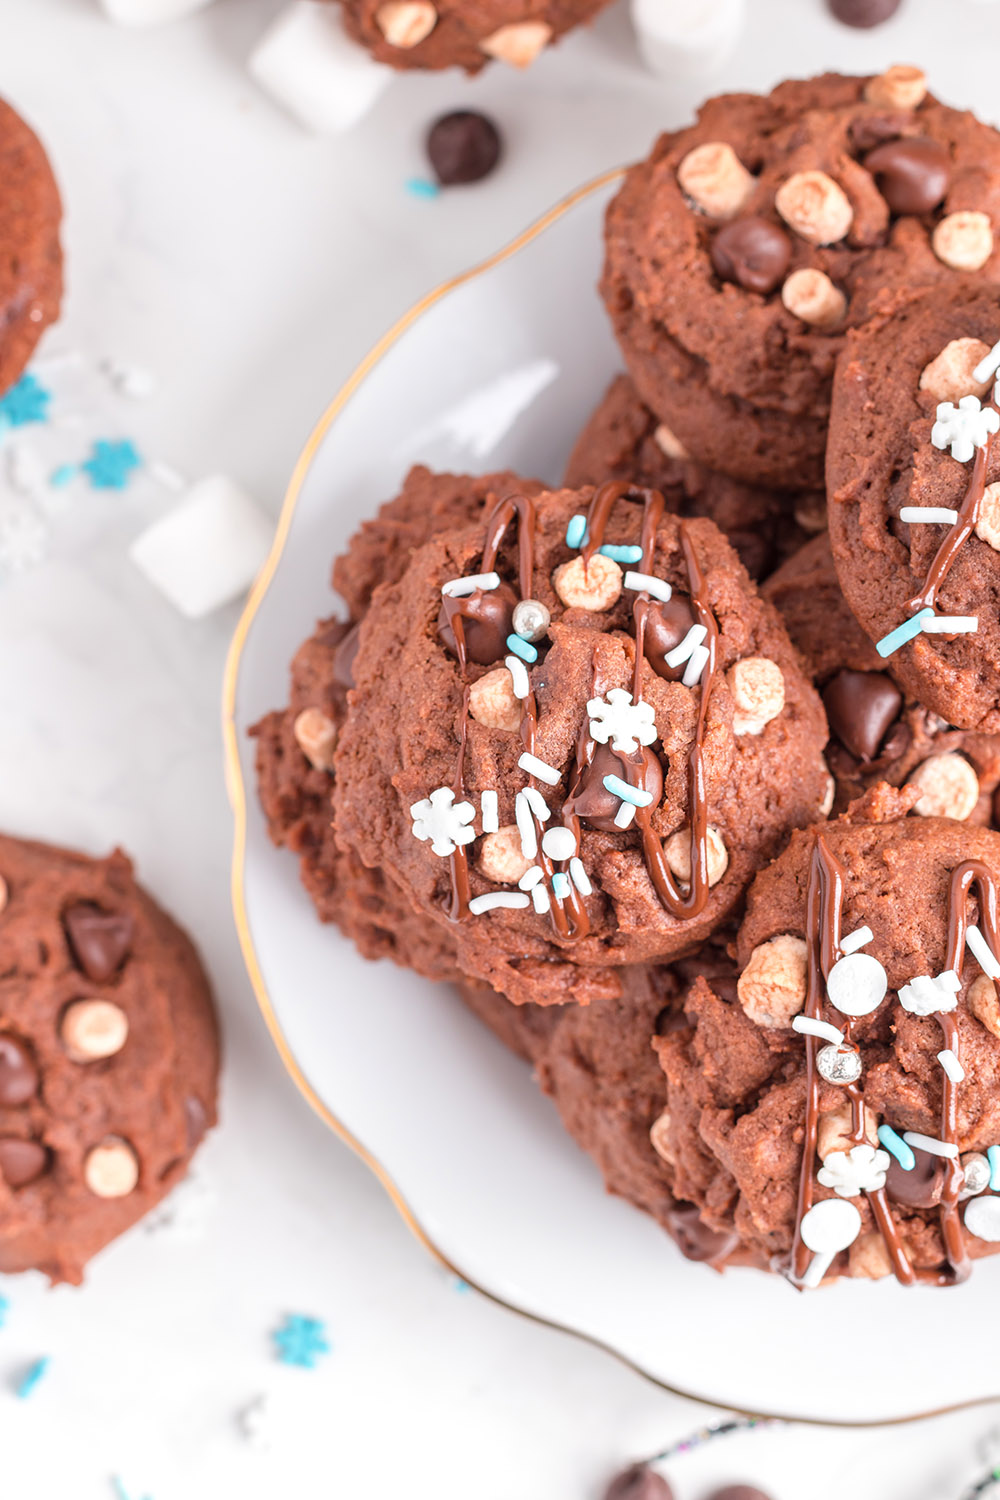 Chocolate cookies with chips and marshmallows.